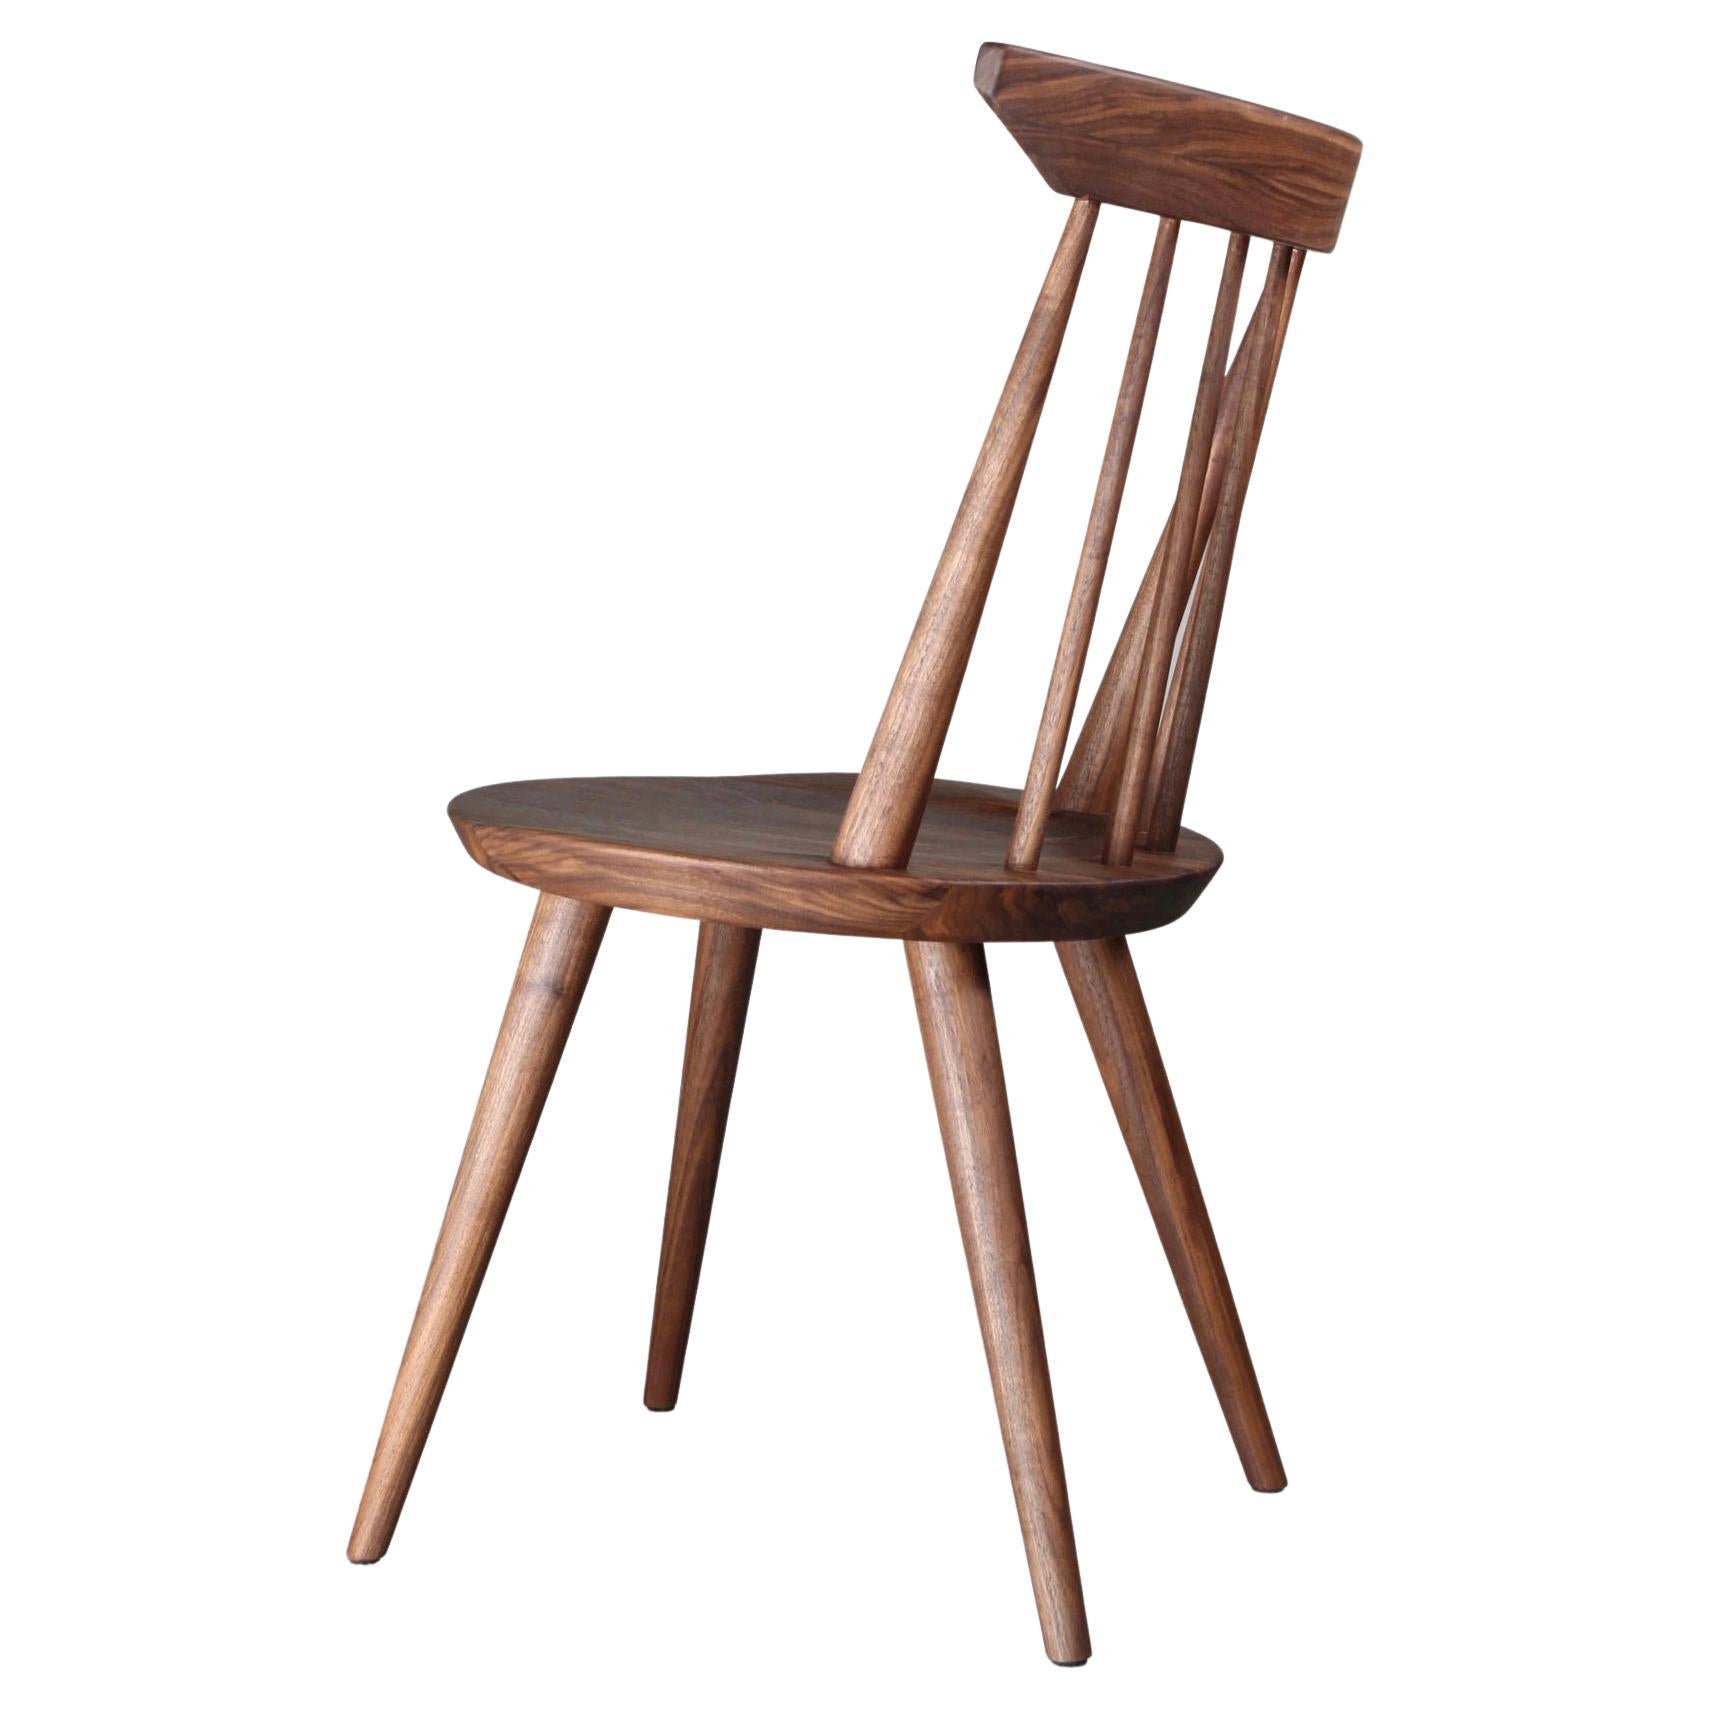 Solid Wood Windsor Style Dining Chair, Spindle Back Chair by Möbius Objects